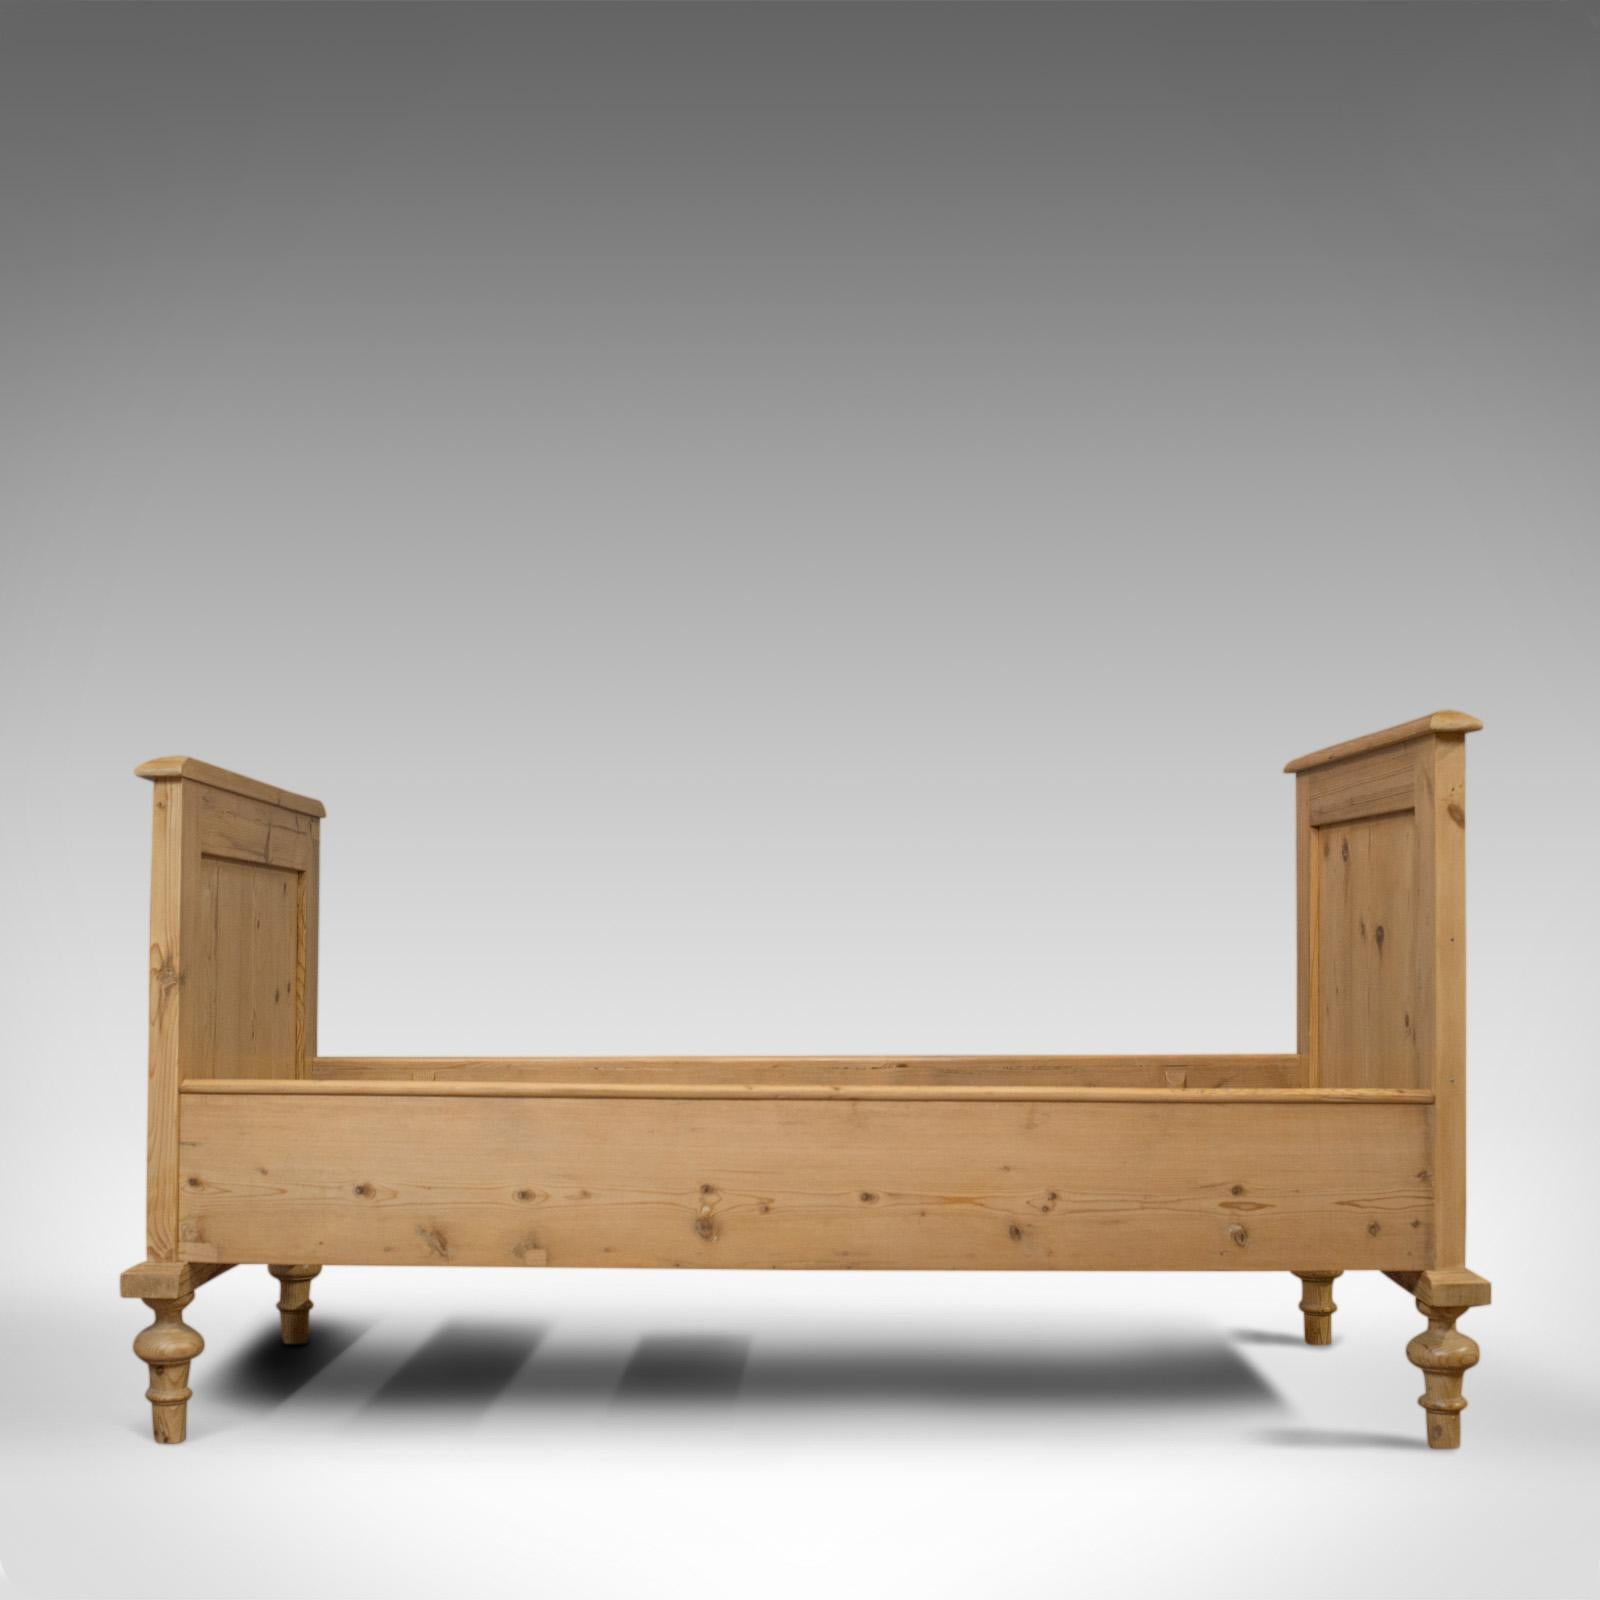 This is an antique bed frame. An English, Victorian pine bedstead dating to the late 19th century, circa 1900.

Select cuts of pine display rich biscuit hues and fine grain interest
Good consistent color throughout and a desirable aged